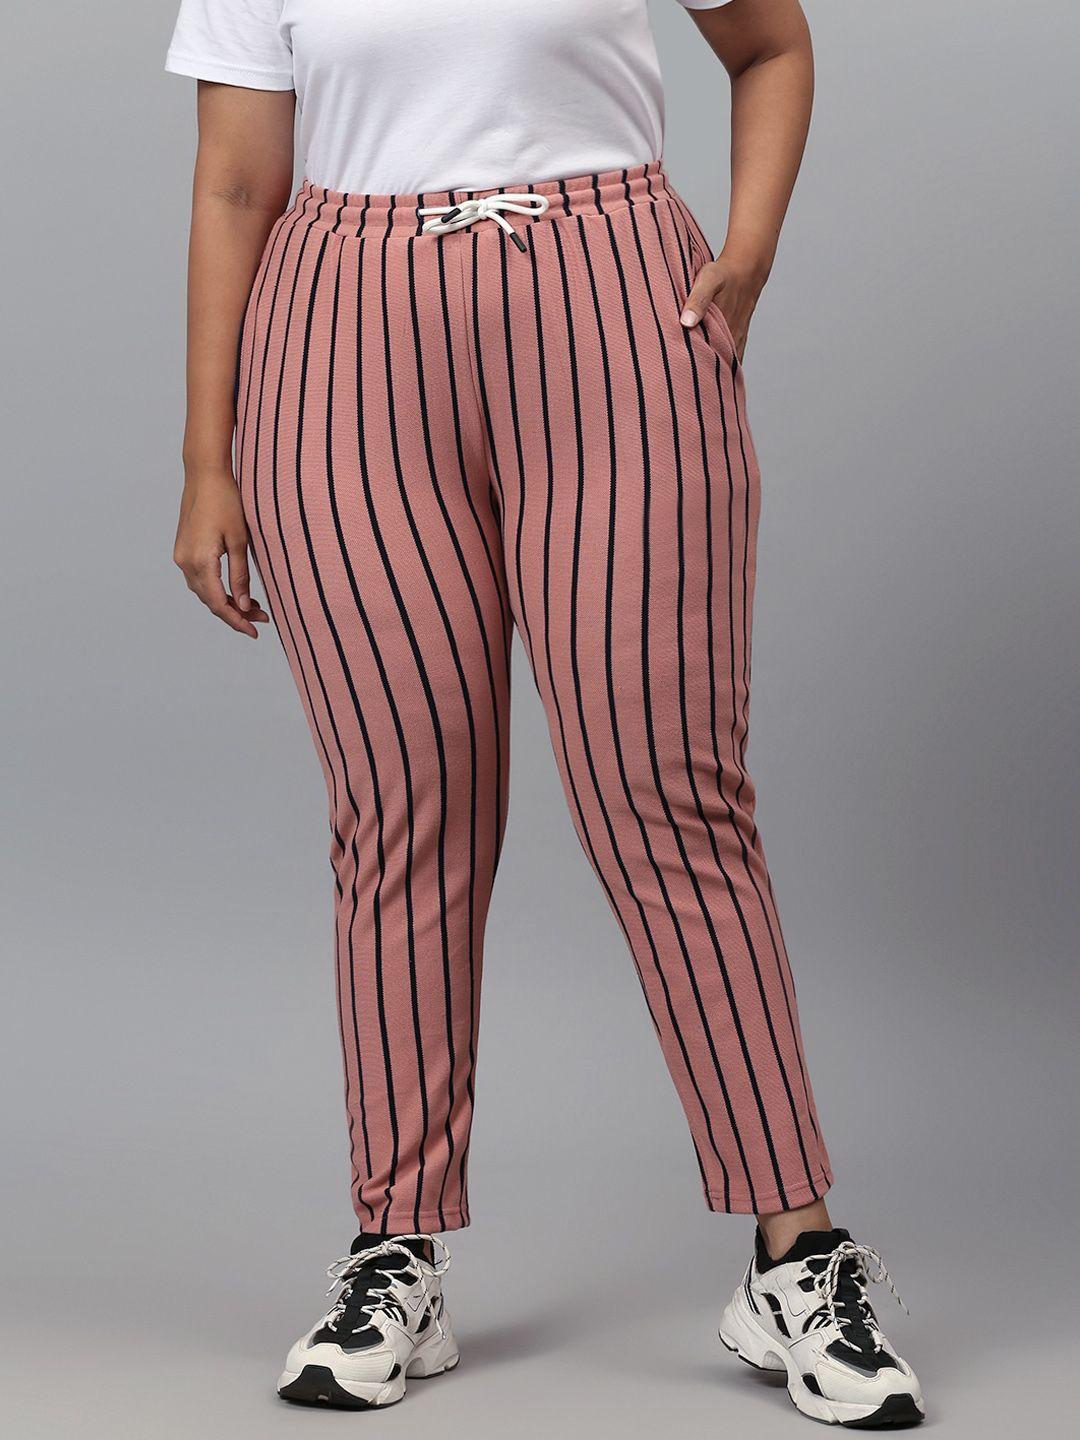 instafab-plus-women-pink-&-black-striped-relaxed-fit-cotton-track-pants